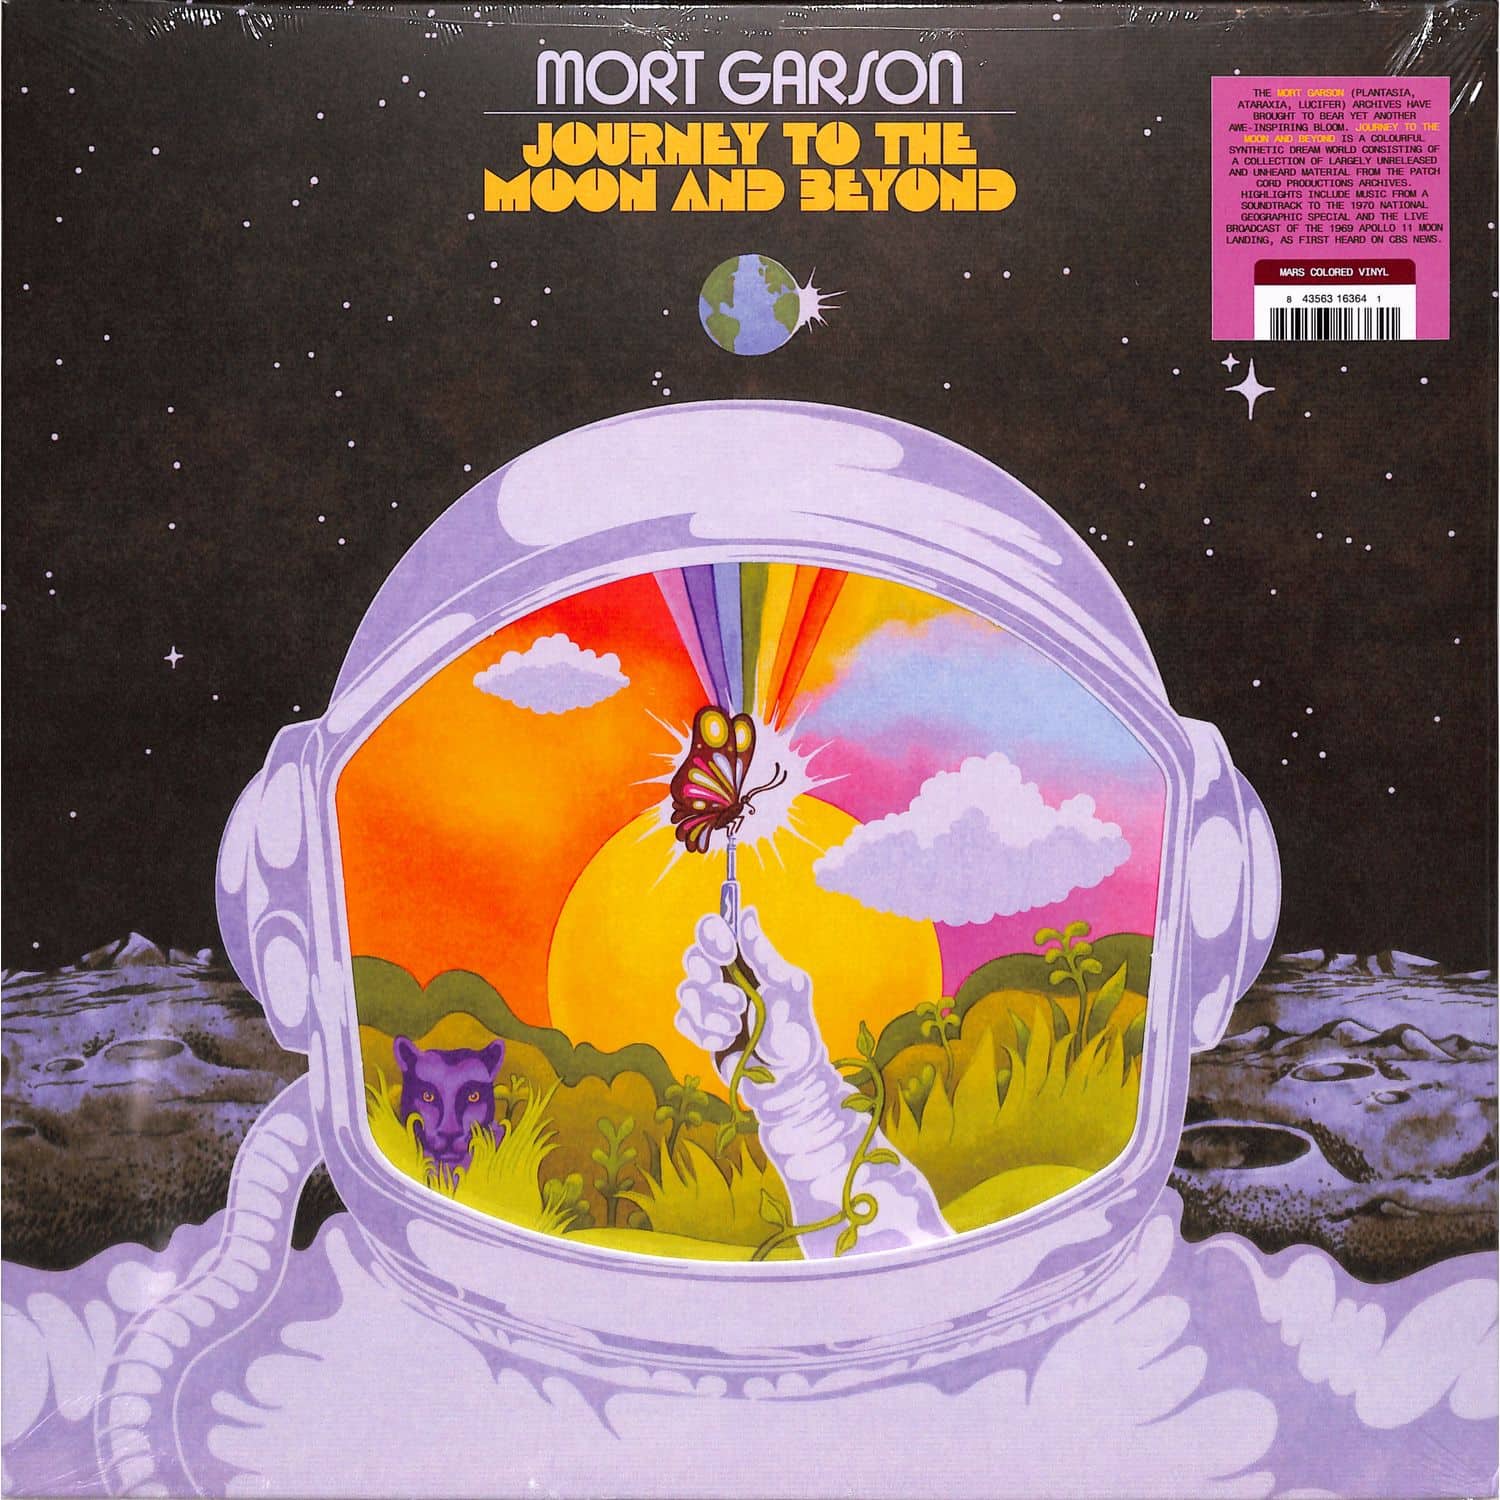 Mort Garson - JOURNEY TO THE MOON AND BEYOND 